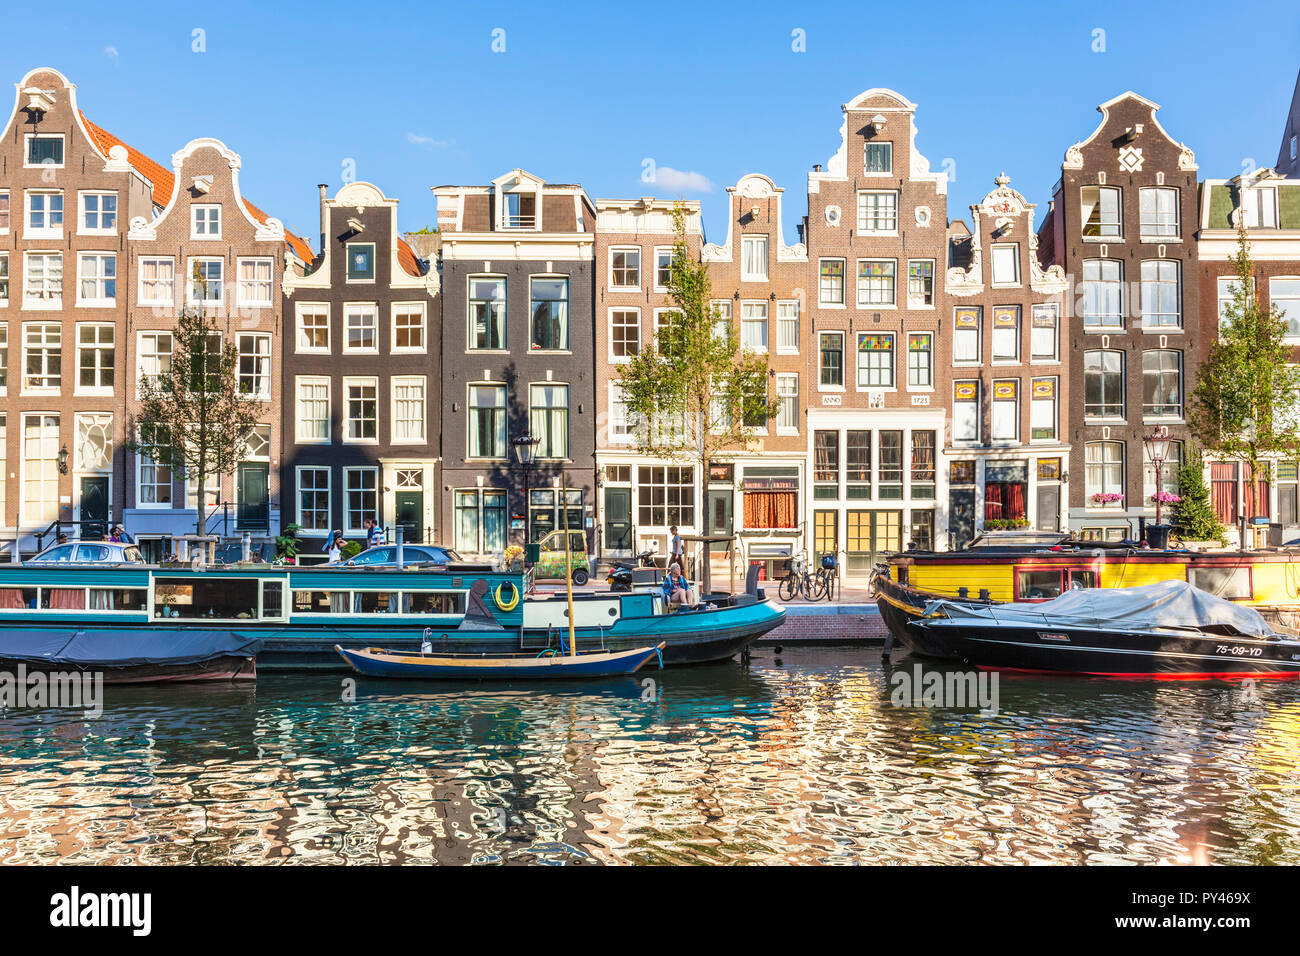 Amsterdam houses with dutch architecture by the canal Amsterdam Holland Netherlands EU Europe Stock Photo